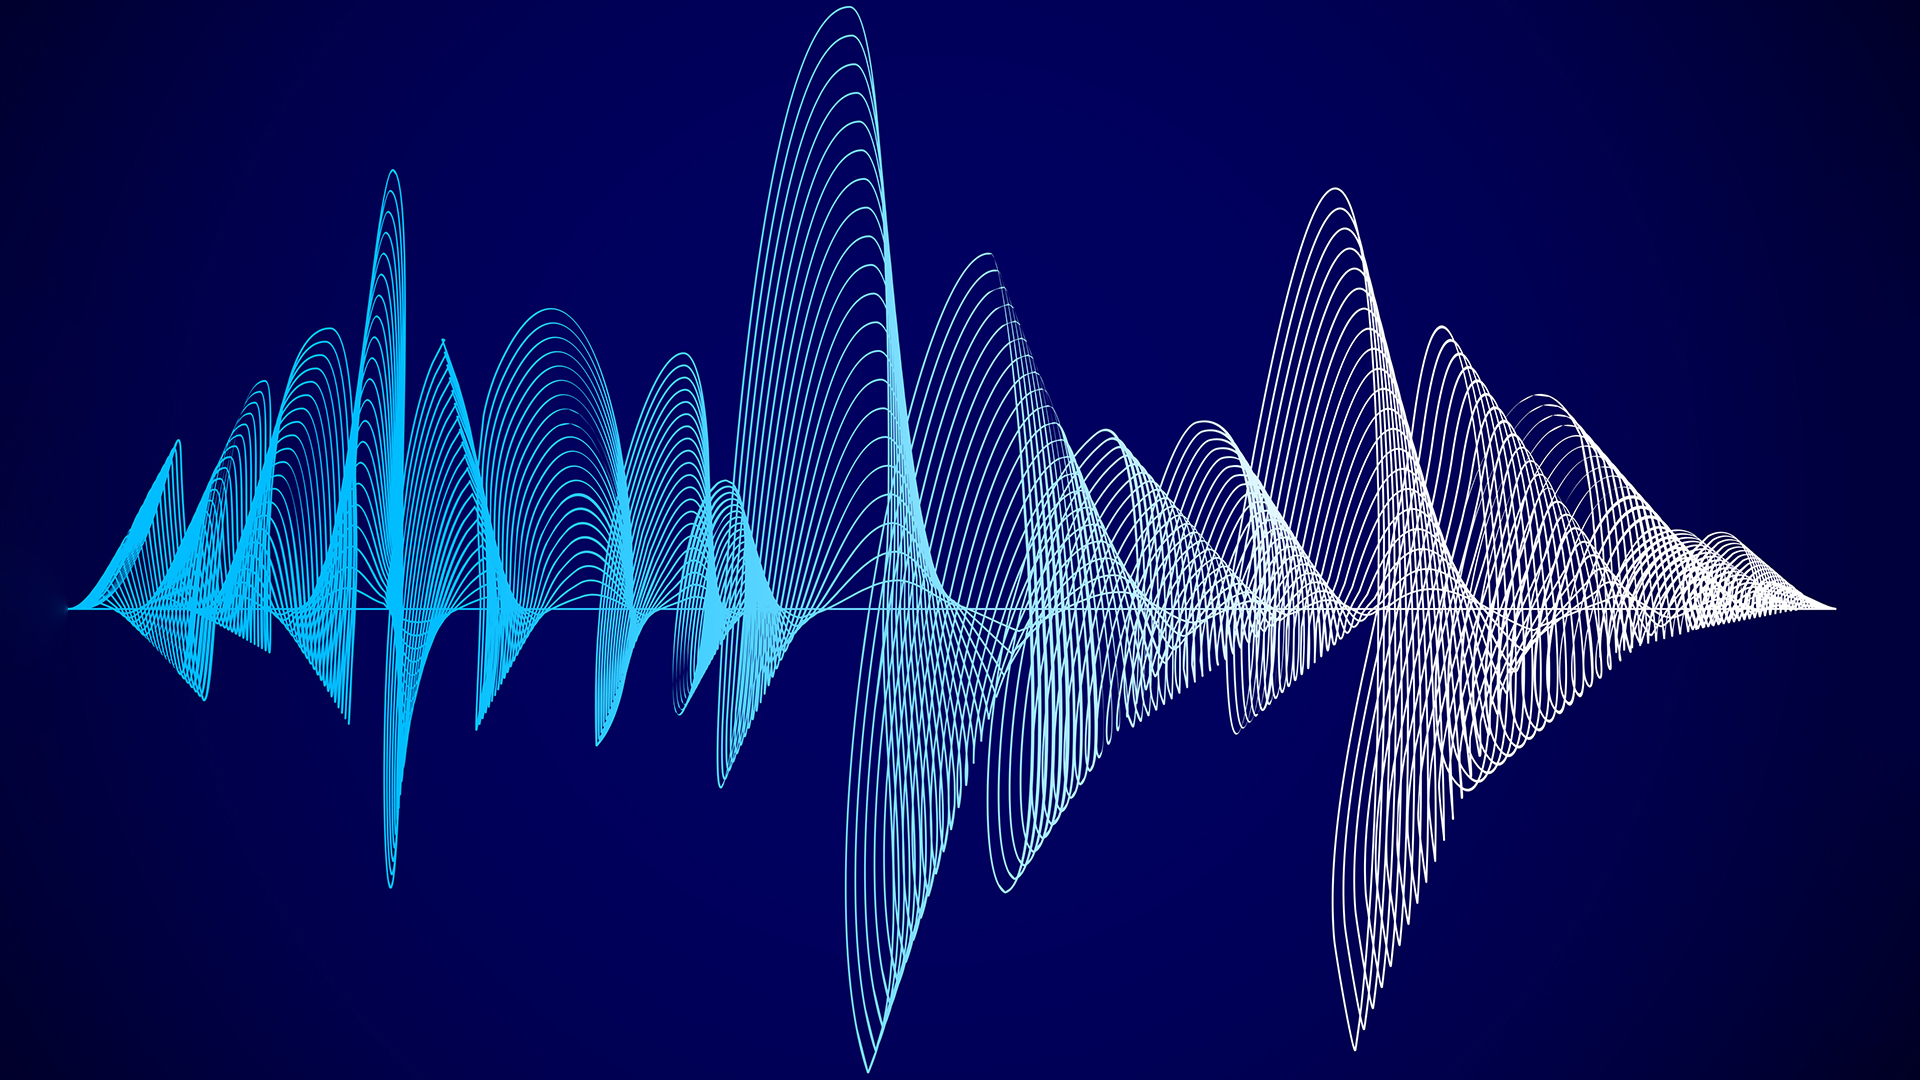 Harnessing the power of sound waves for advances in drug delivery